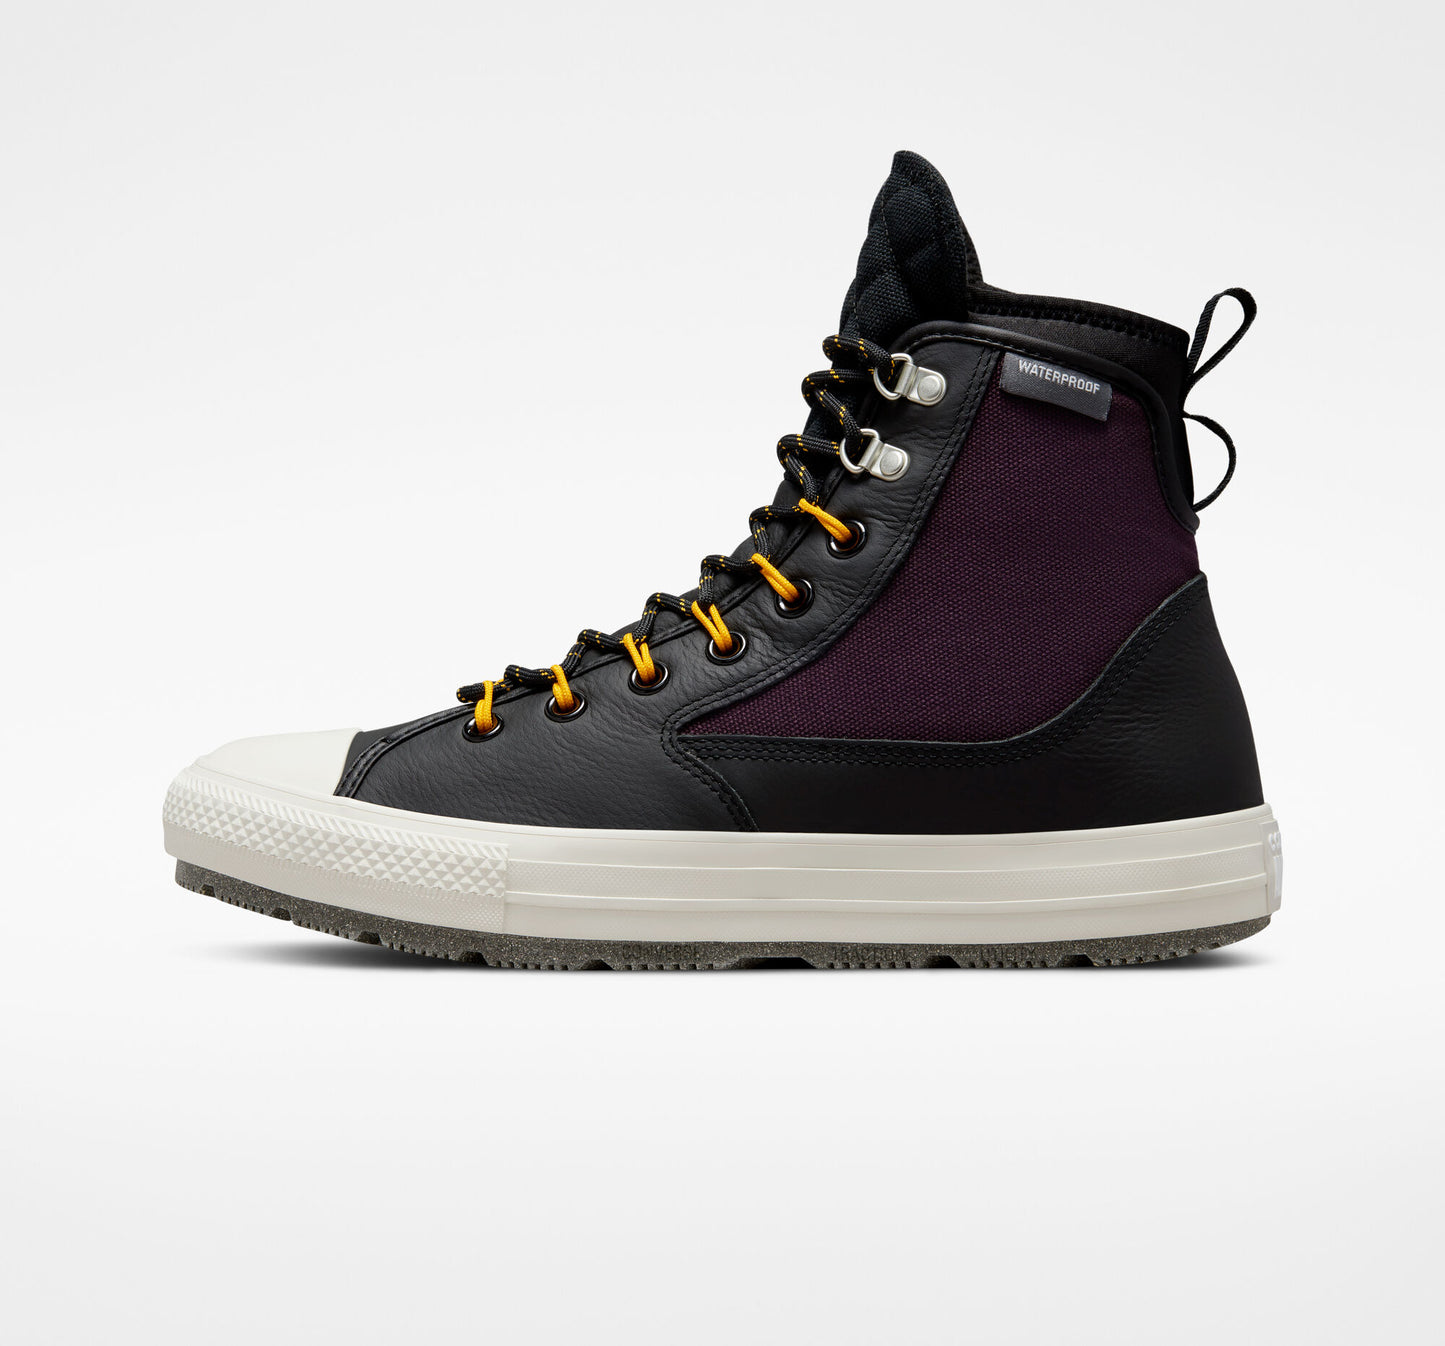 Converse Chuck Taylor All Star All Terrain Counter Climate WP Boot, A01381C Multi Sizes Black/Black Cherry